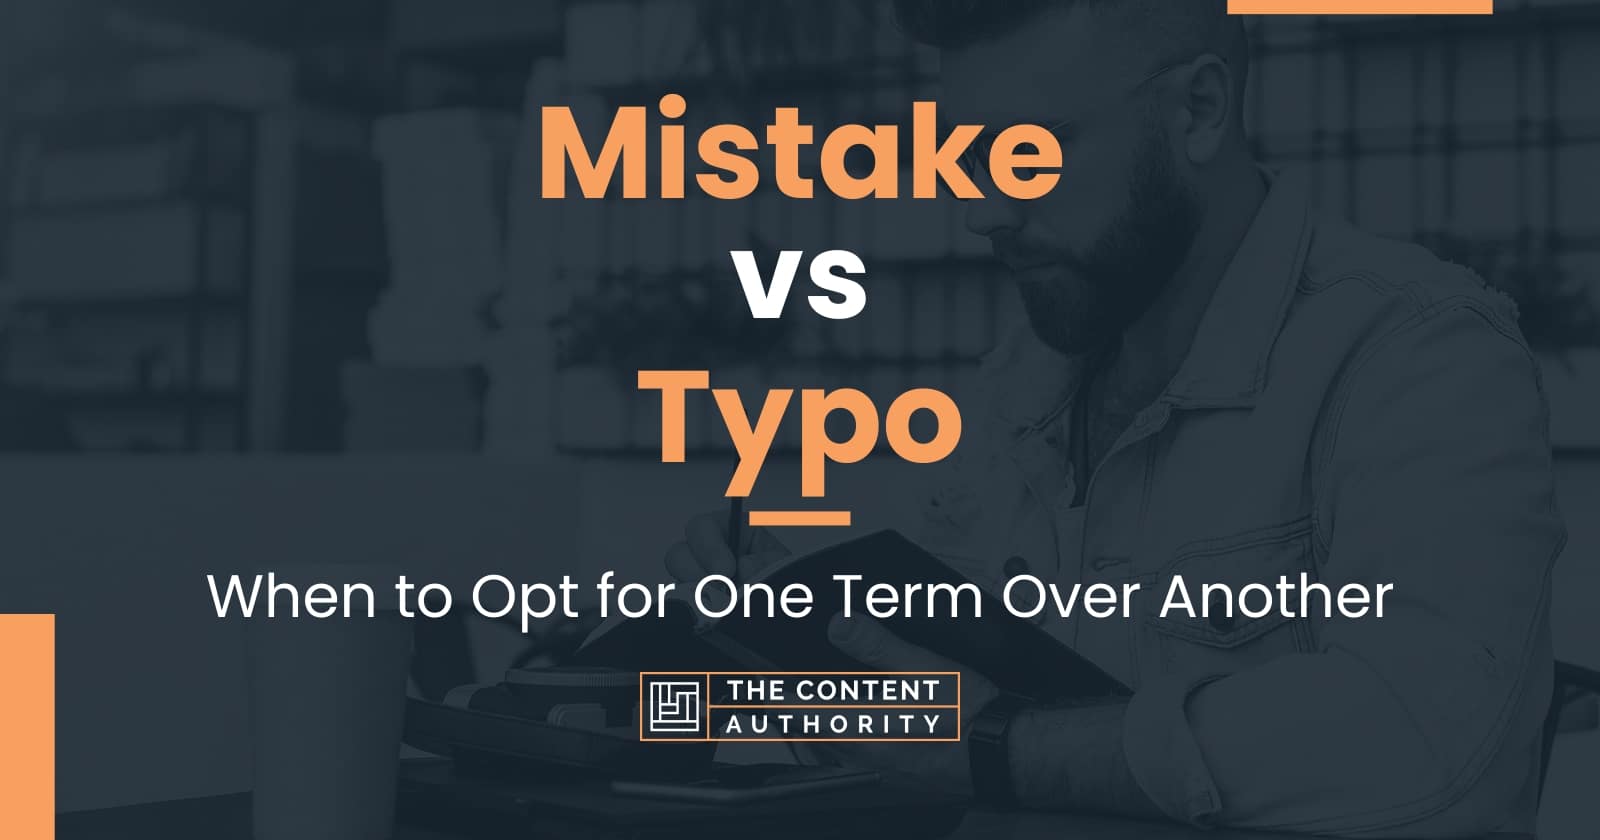 Mistake vs Typo: When to Opt for One Term Over Another